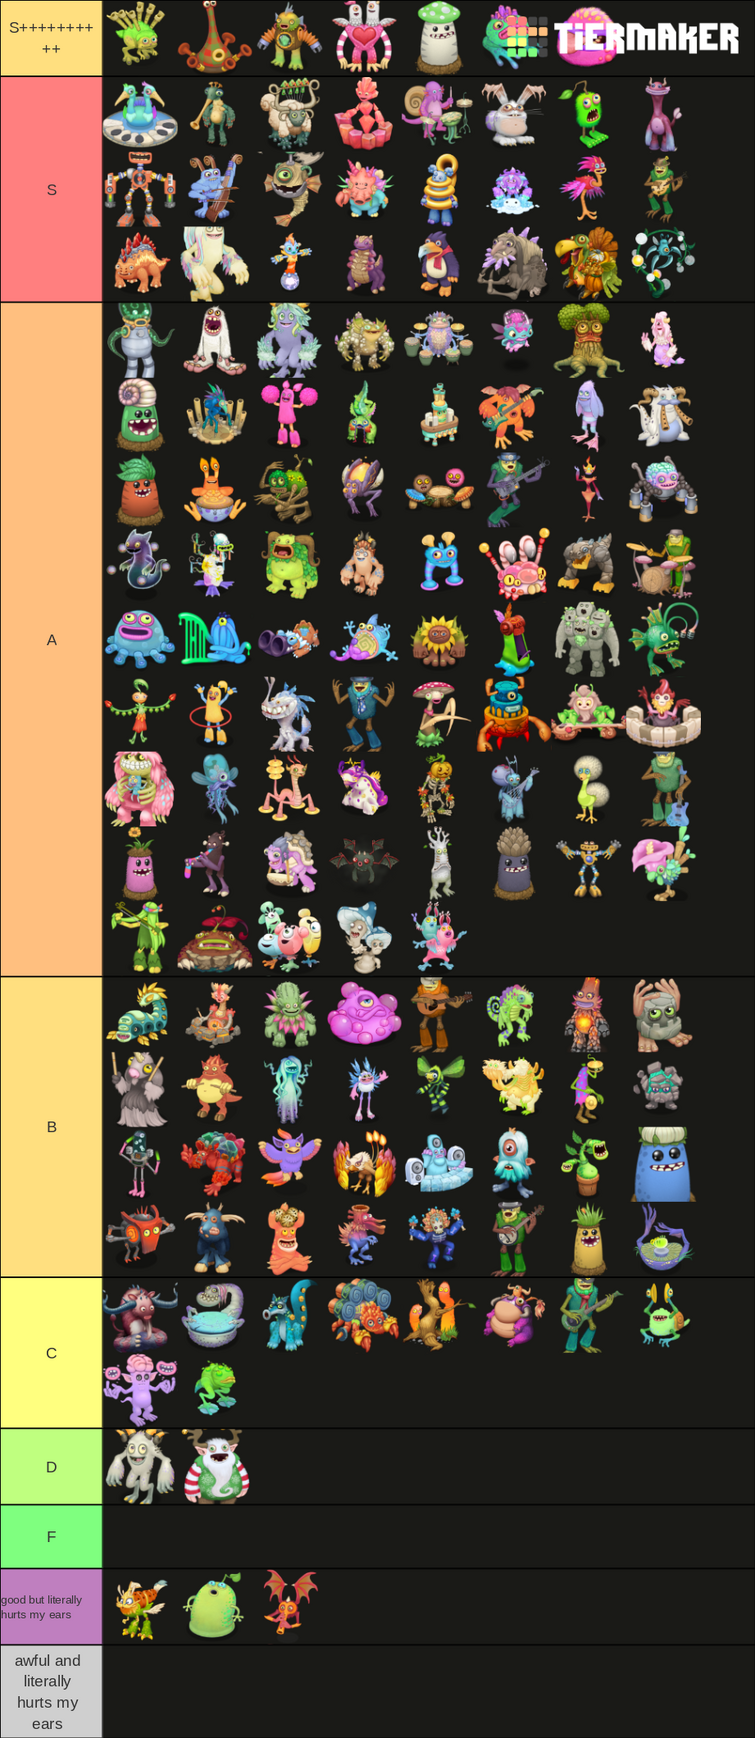 Tier list of all the monsters (updated)